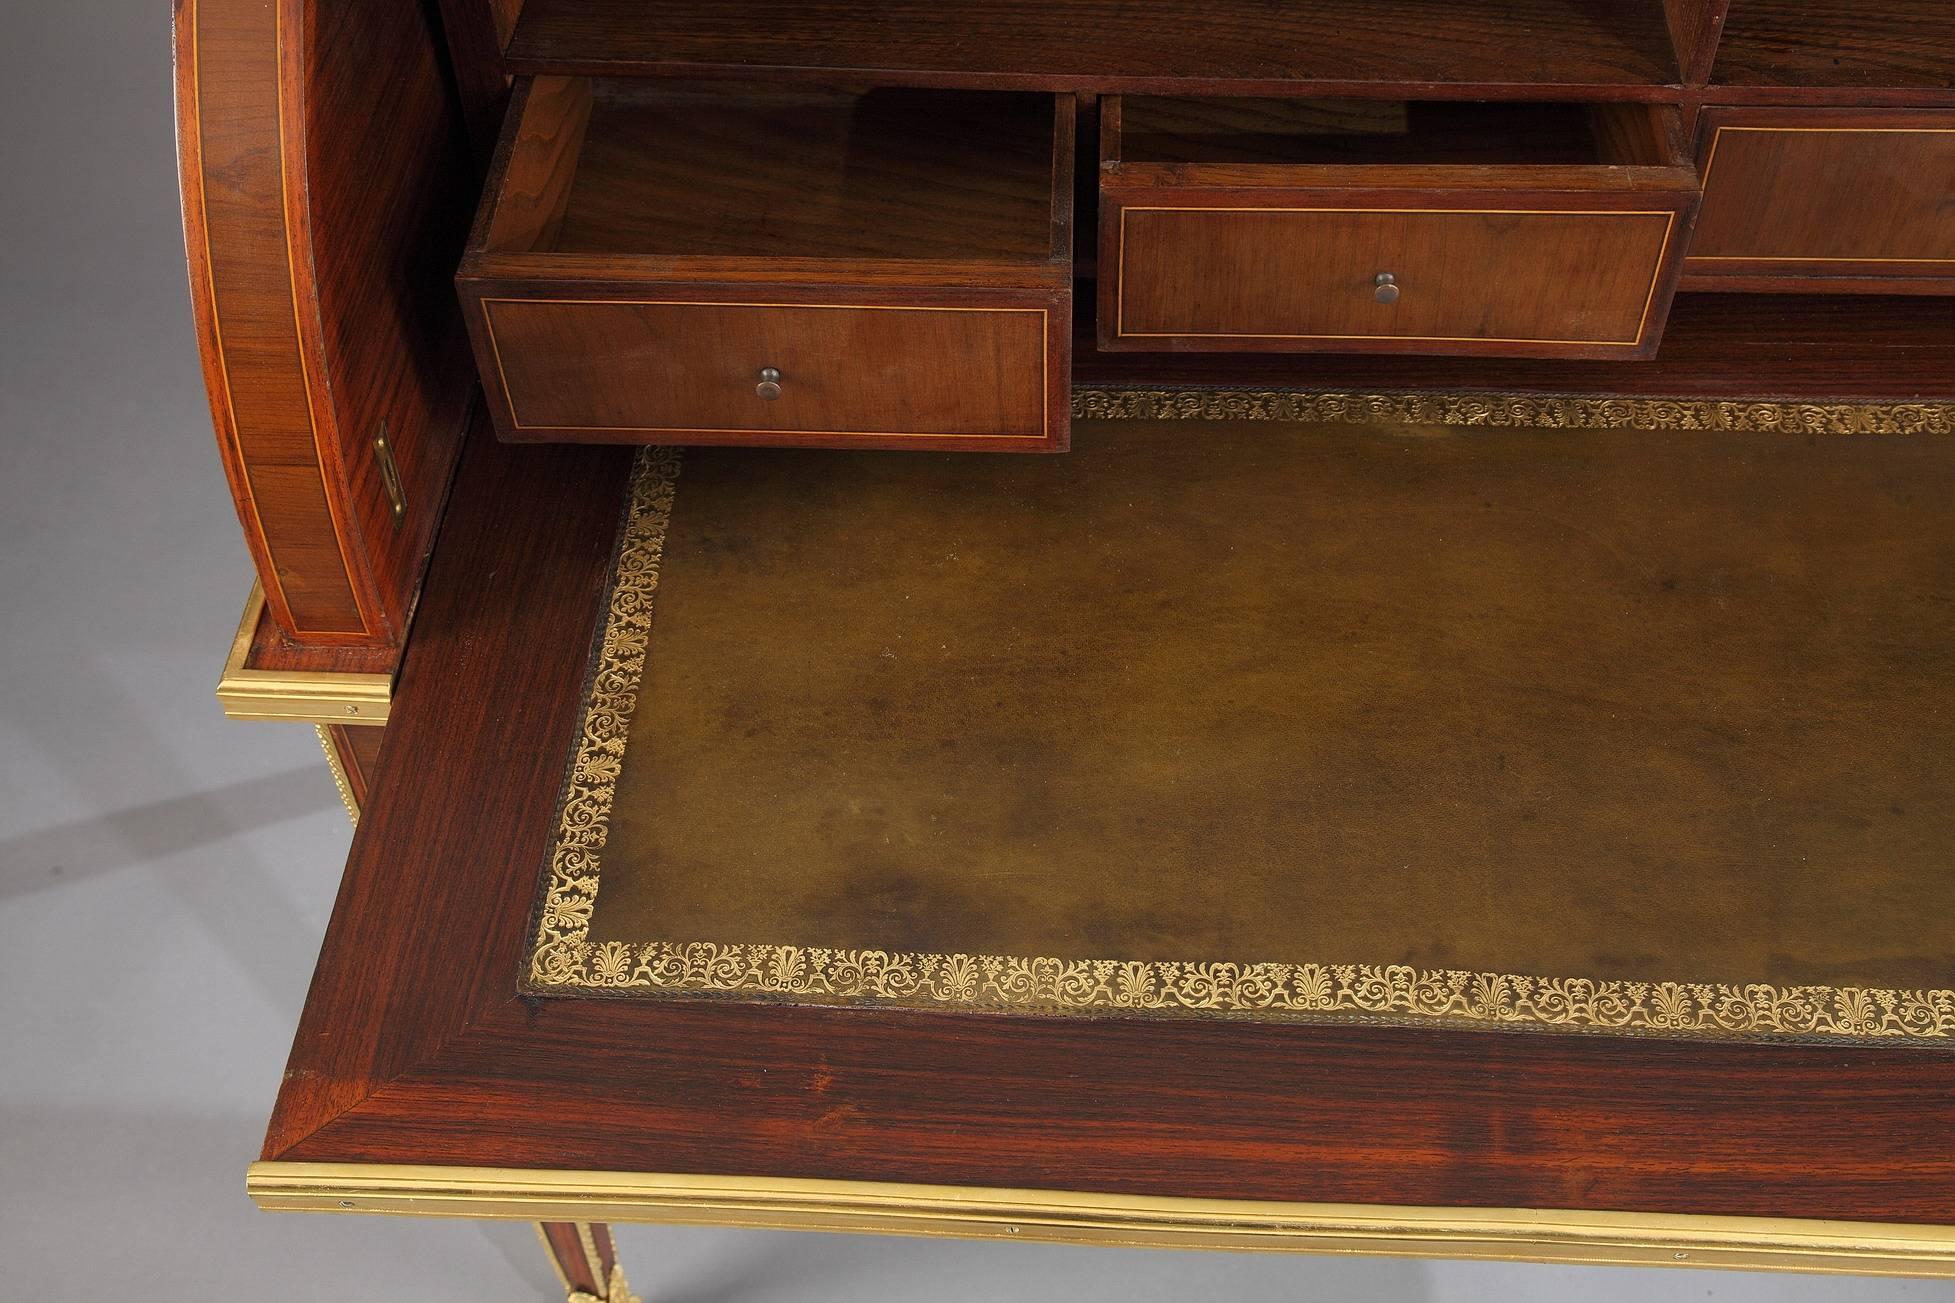 Louis XVI Marquetry Rolltop Desk after One Commissioned by Marie-Antoinette to Riesener